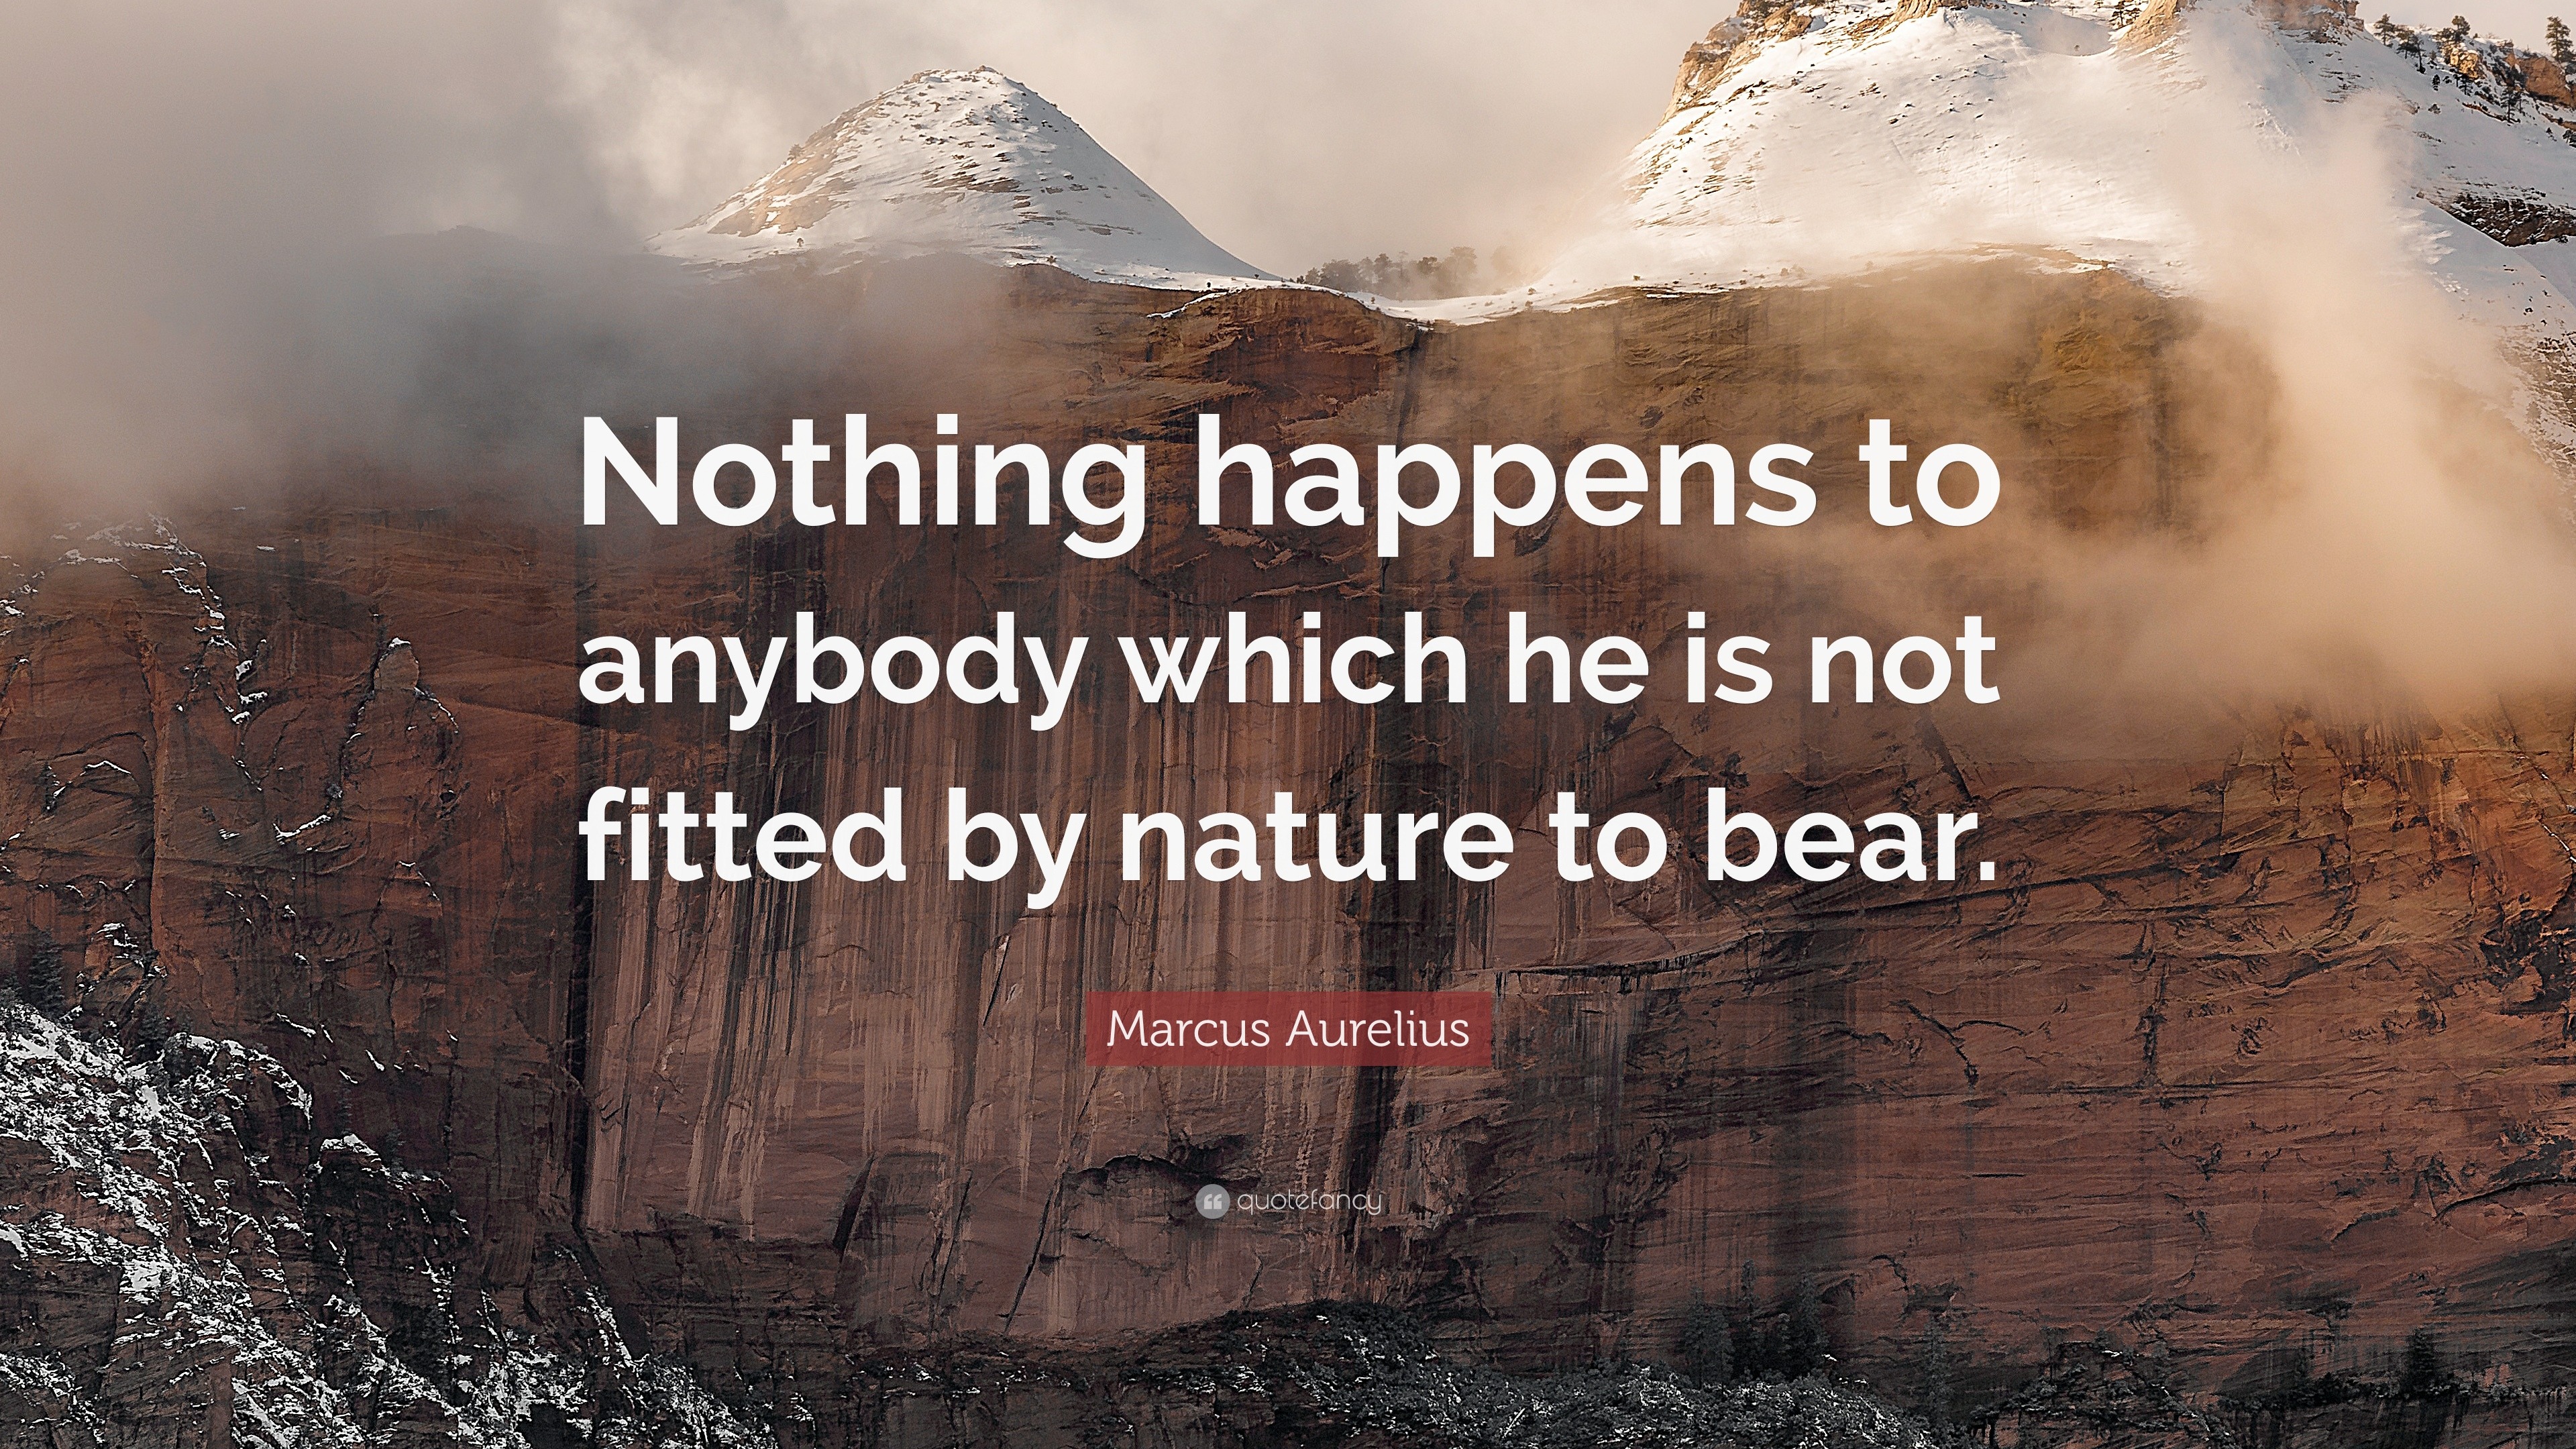 Marcus Aurelius Quote: “Nothing happens to anybody which he is not